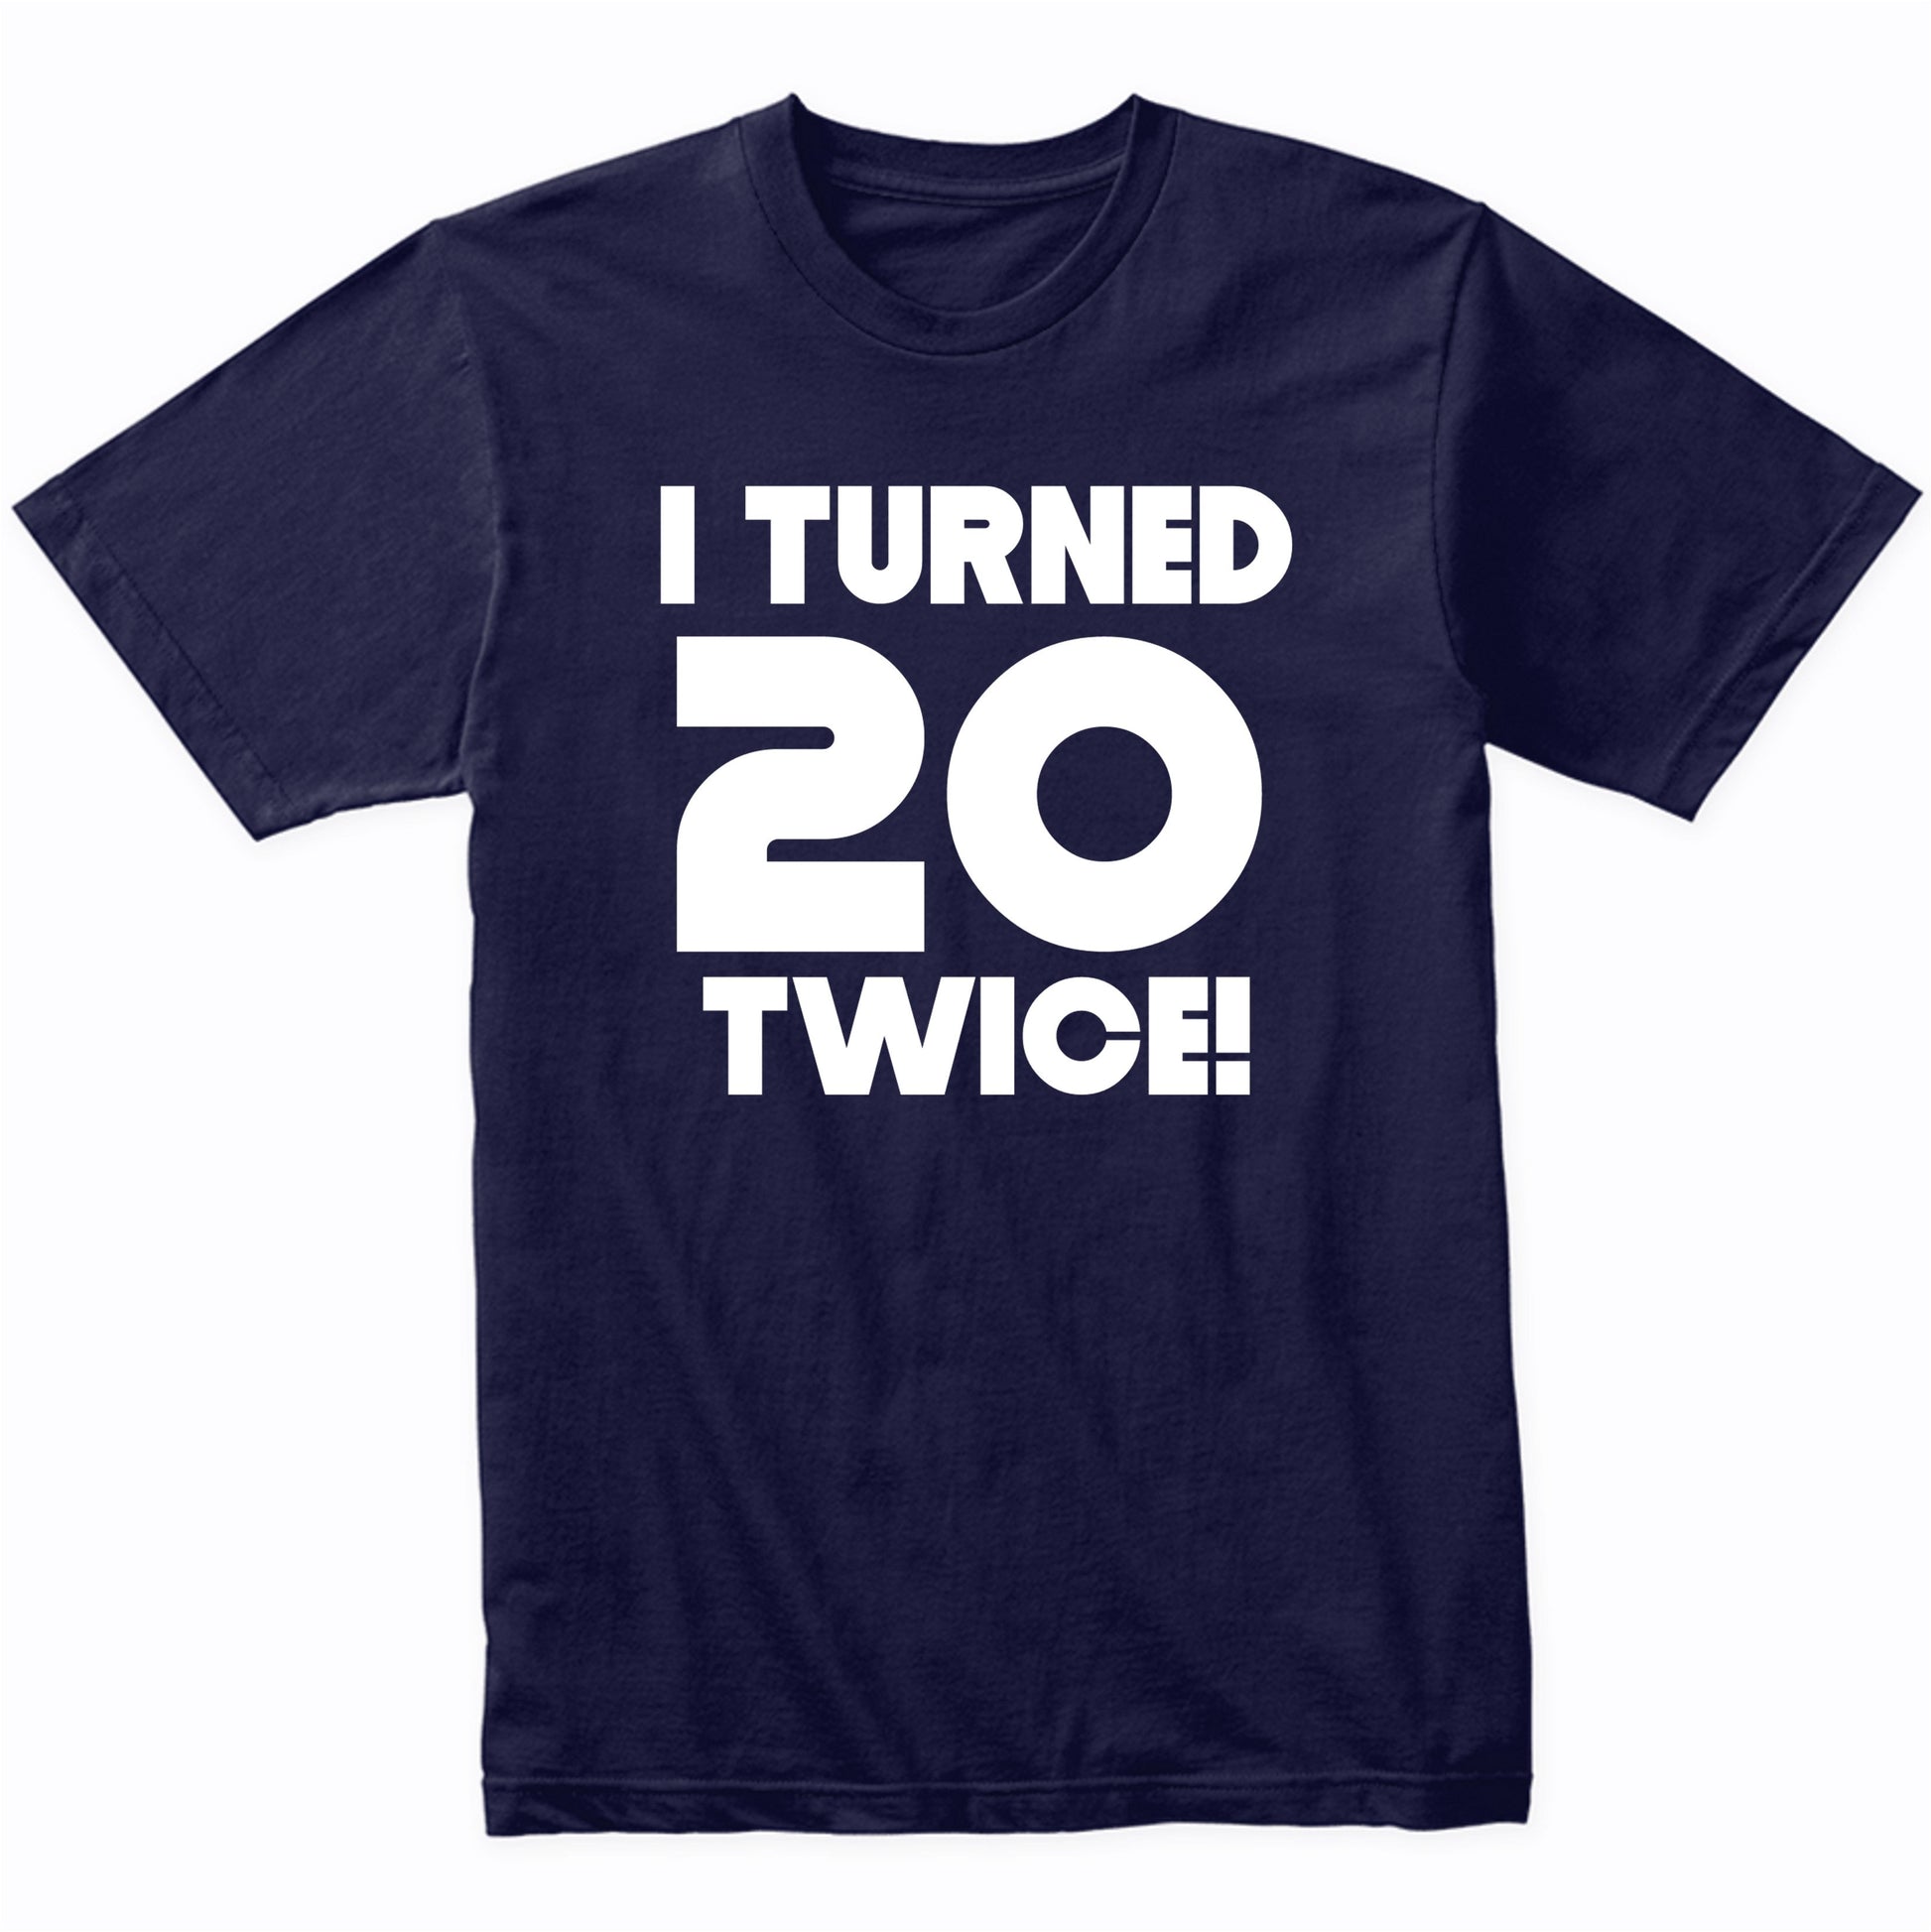 I Turned 20 Twice 40 Years Old Funny 40th Birthday T-Shirt